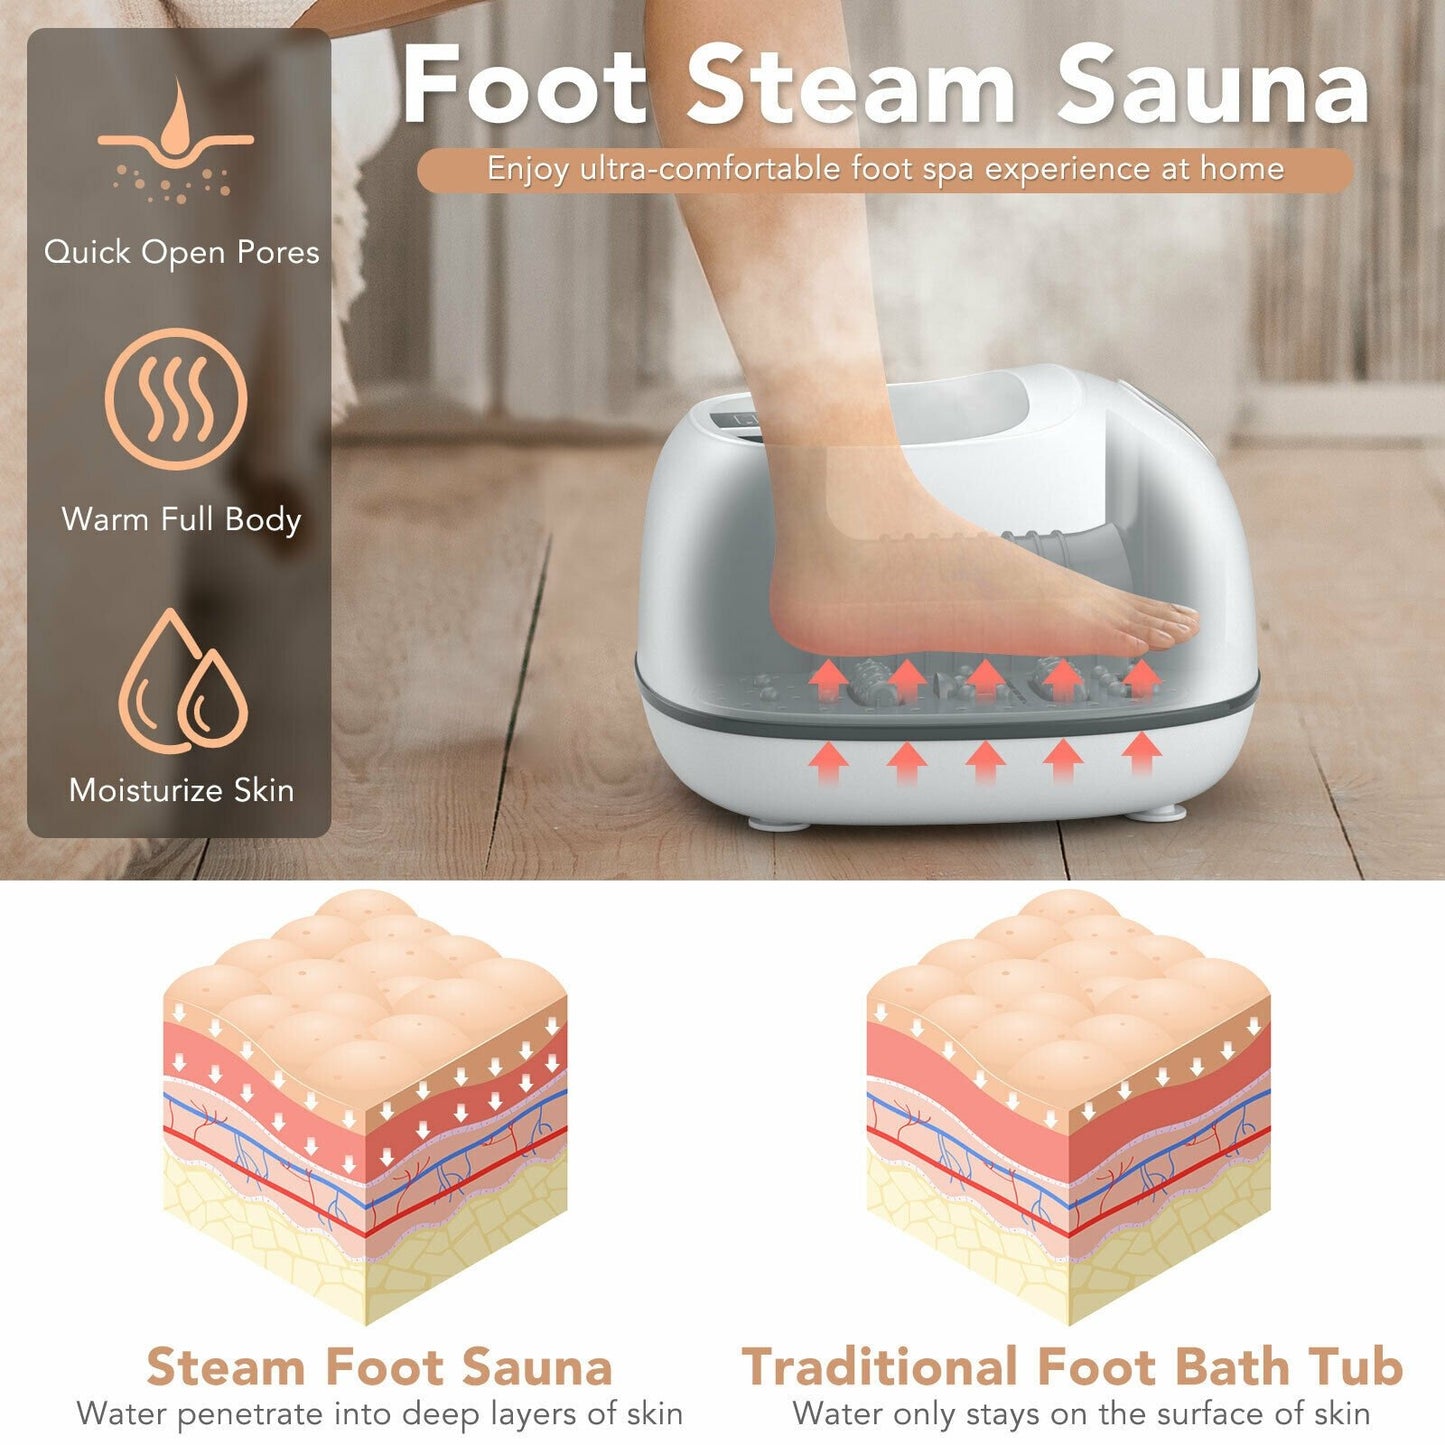 Steam Foot Spa Massager With 3 Heating Levels and Timers, White